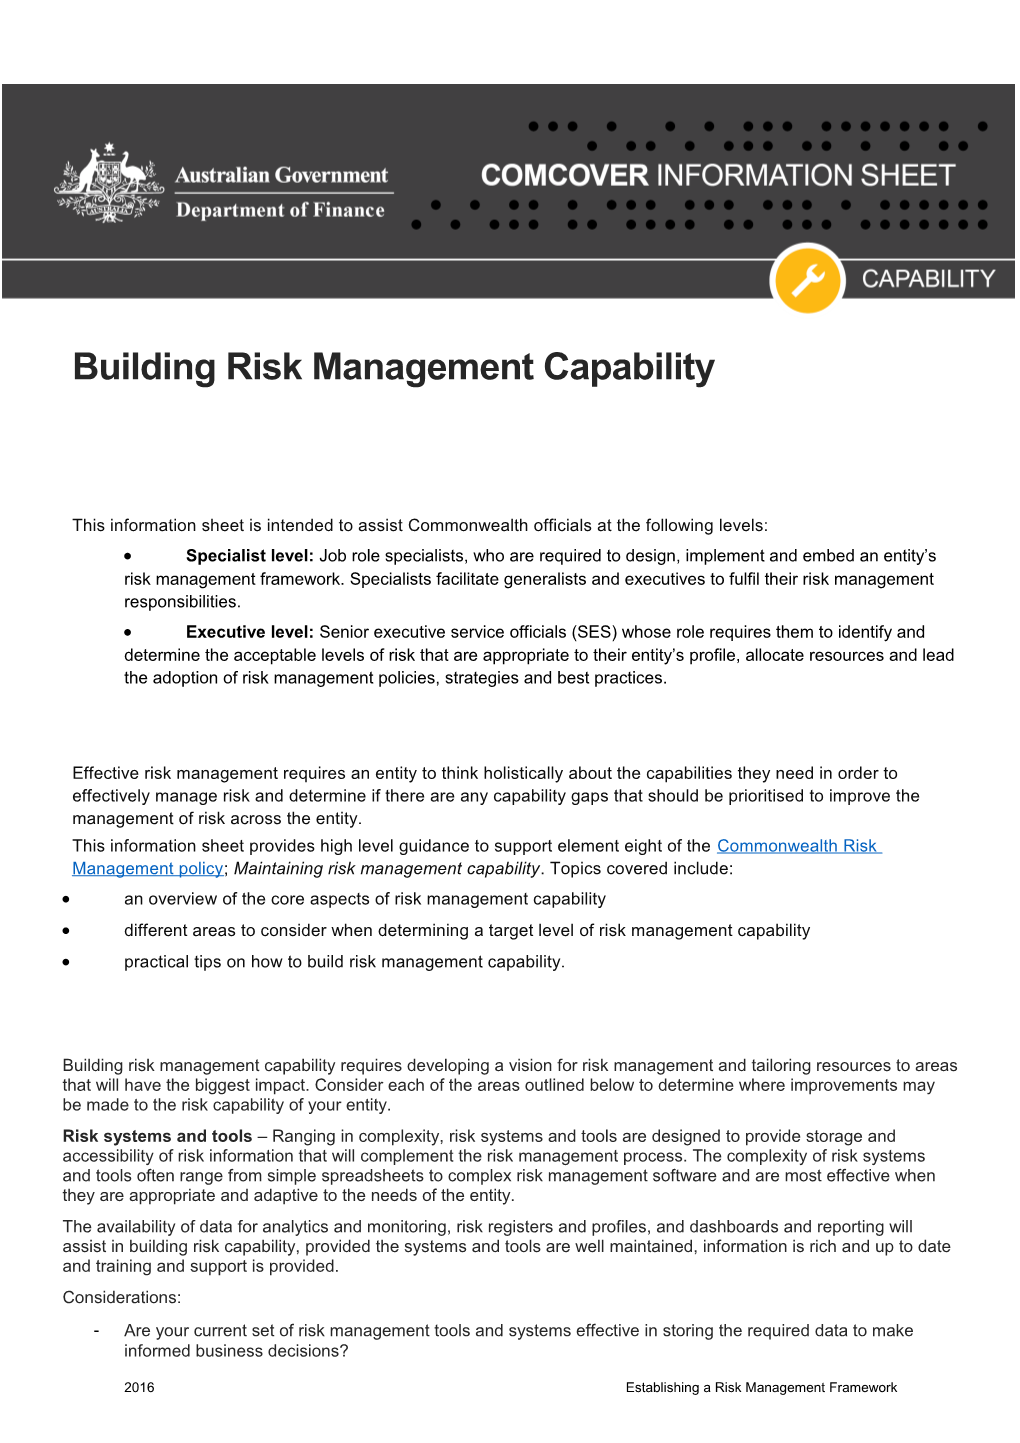 Information Sheet - Building Risk Management Capability Across an Entity